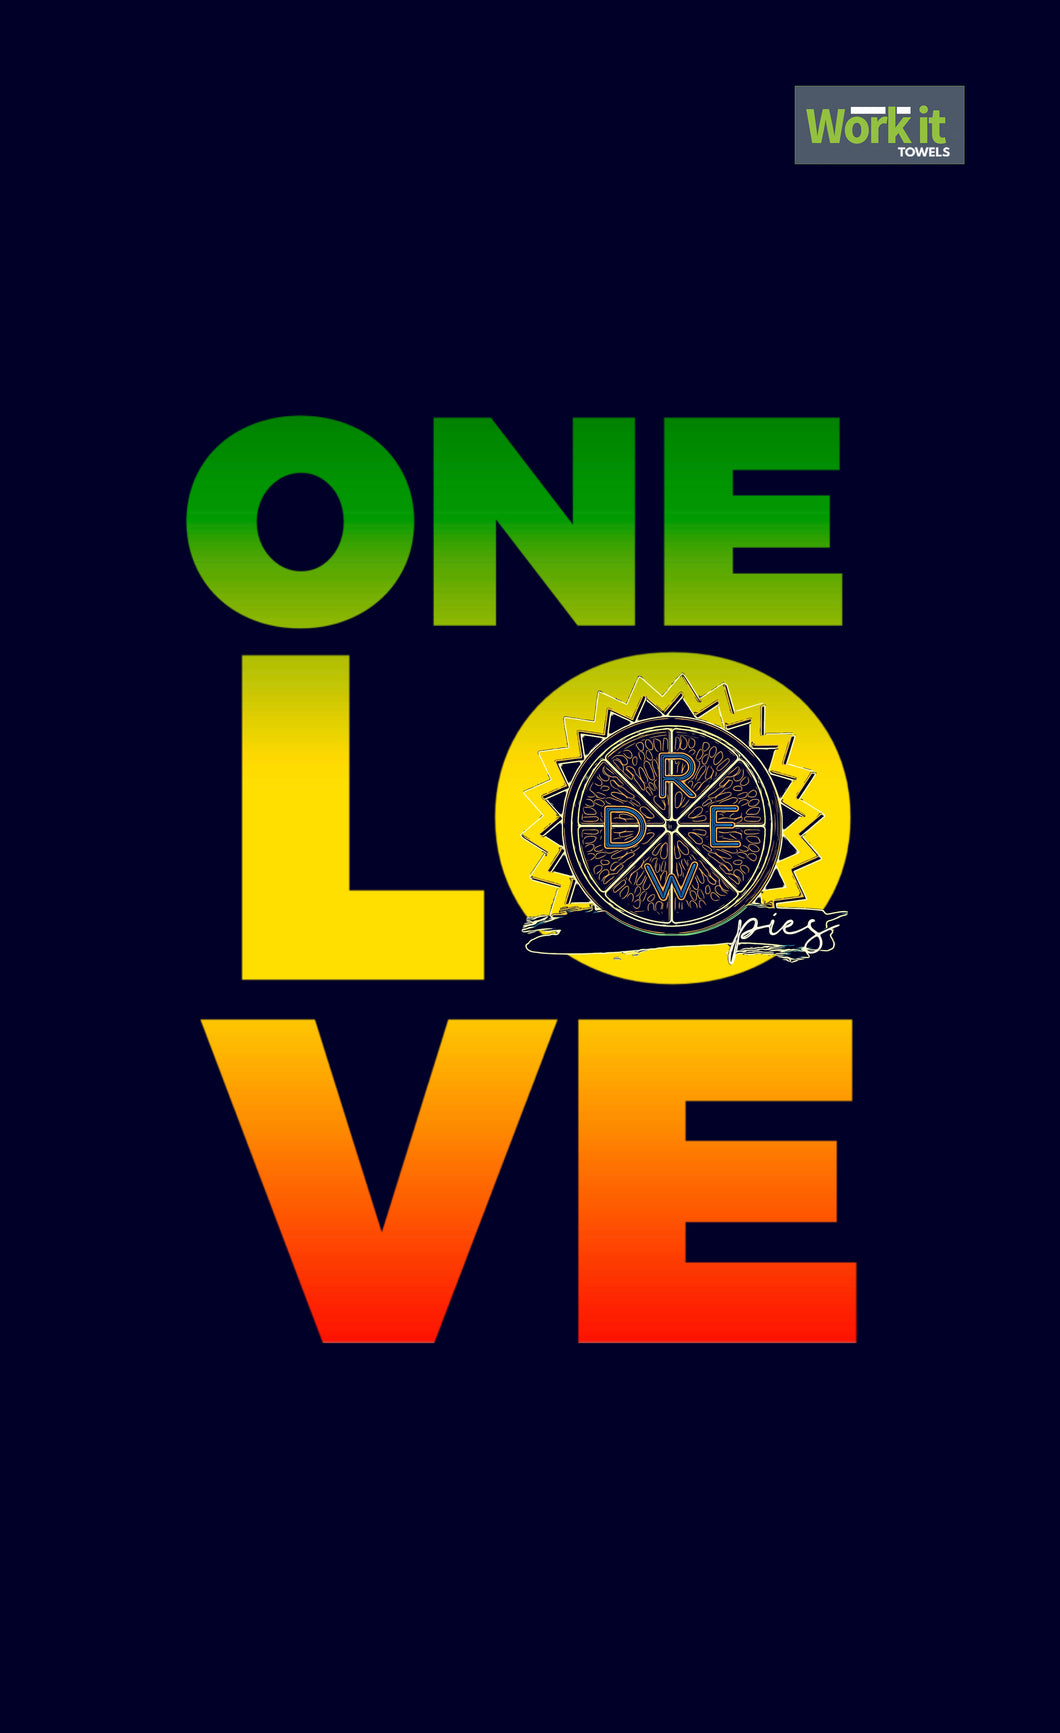 One Love - work it towels